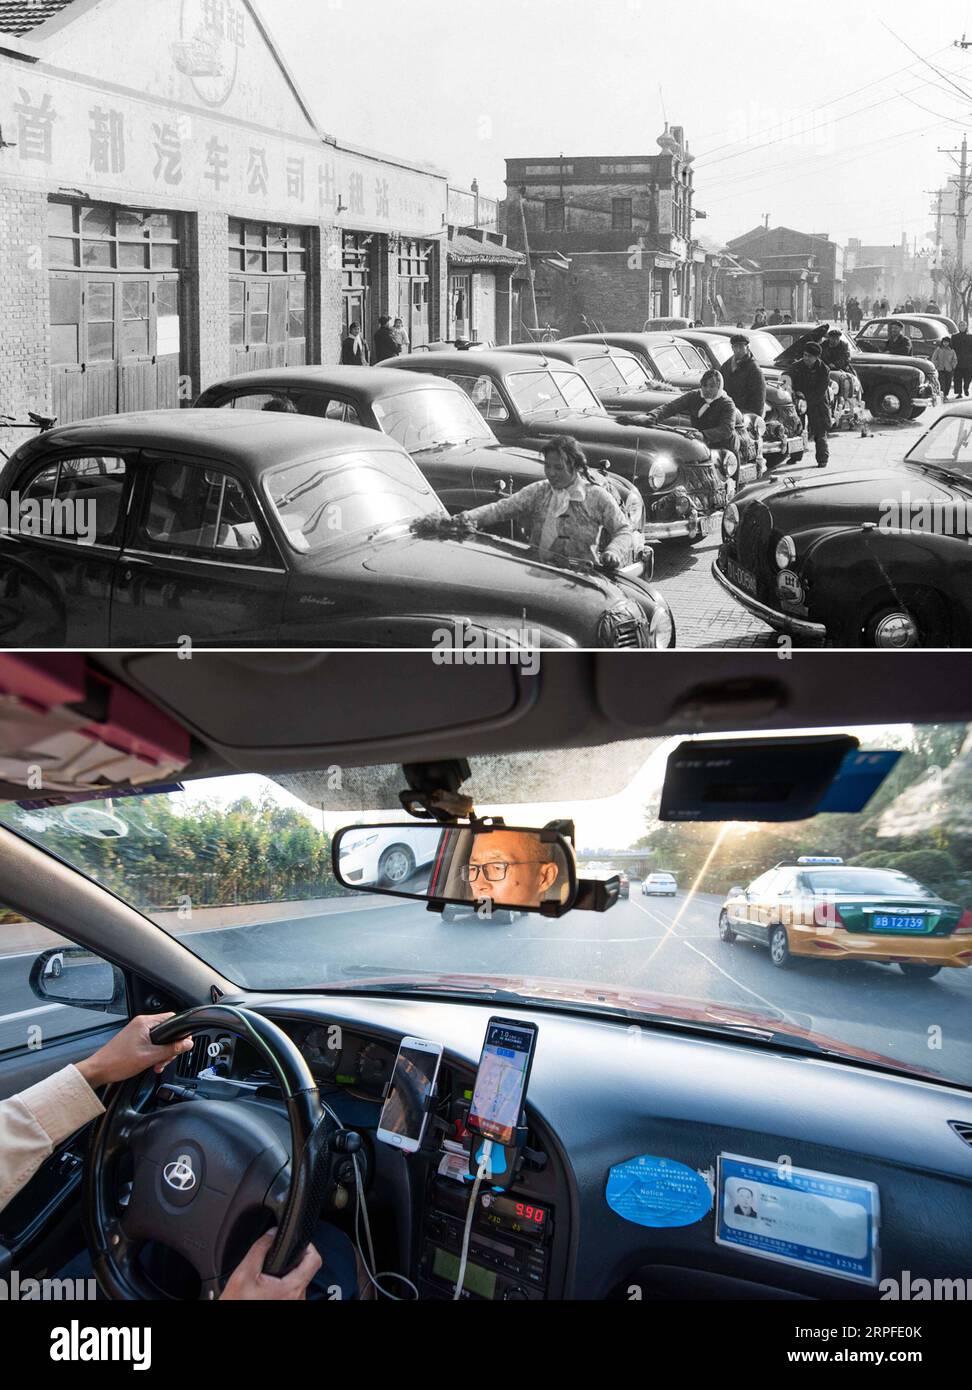 190922 -- BEIJING, Sept. 22, 2019 -- Top: Photo taken in 1965 by Zheng Zhensun shows employees of a car-hailing agency cleaning cars in Beijing, capital of China. Bottom: Photo taken on Aug. 25, 2019 by shows taxi driver Mu Huaidong heading to the destination after taking an order by online car-hailing platforms in Beijing. In 1949 when the People s Republic of China was founded, the Chinese people faced a devastated country that needed to be rebuilt from scratch after decades of warfare and chaos. After decades of unremitting endeavors and dedication by the Chinese people, China has grown to Stock Photo